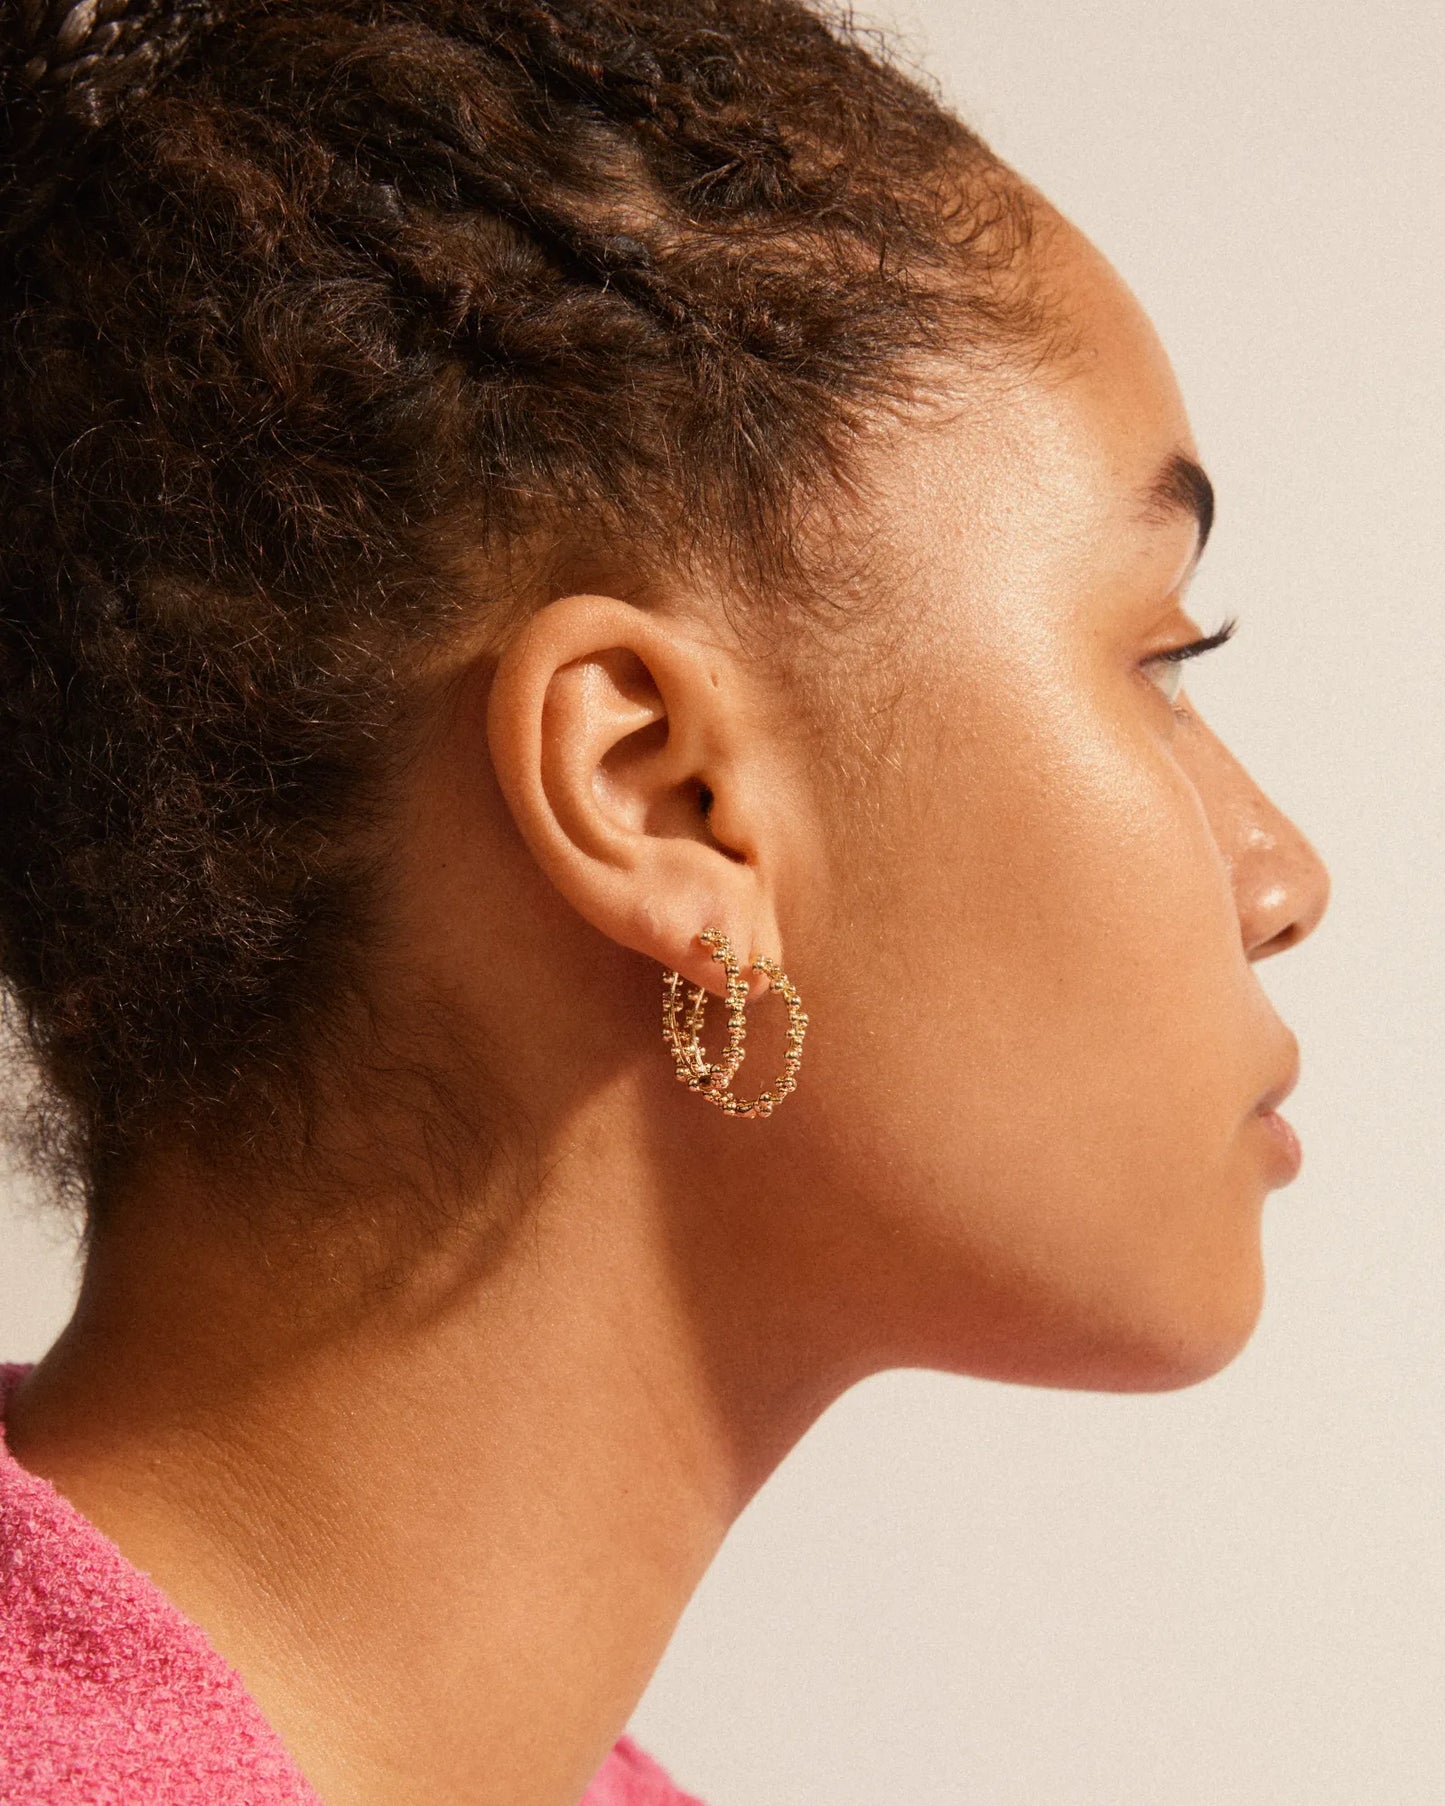 Solidarity Recycled Large Bubbles Hoop Earrings - Gold Plated